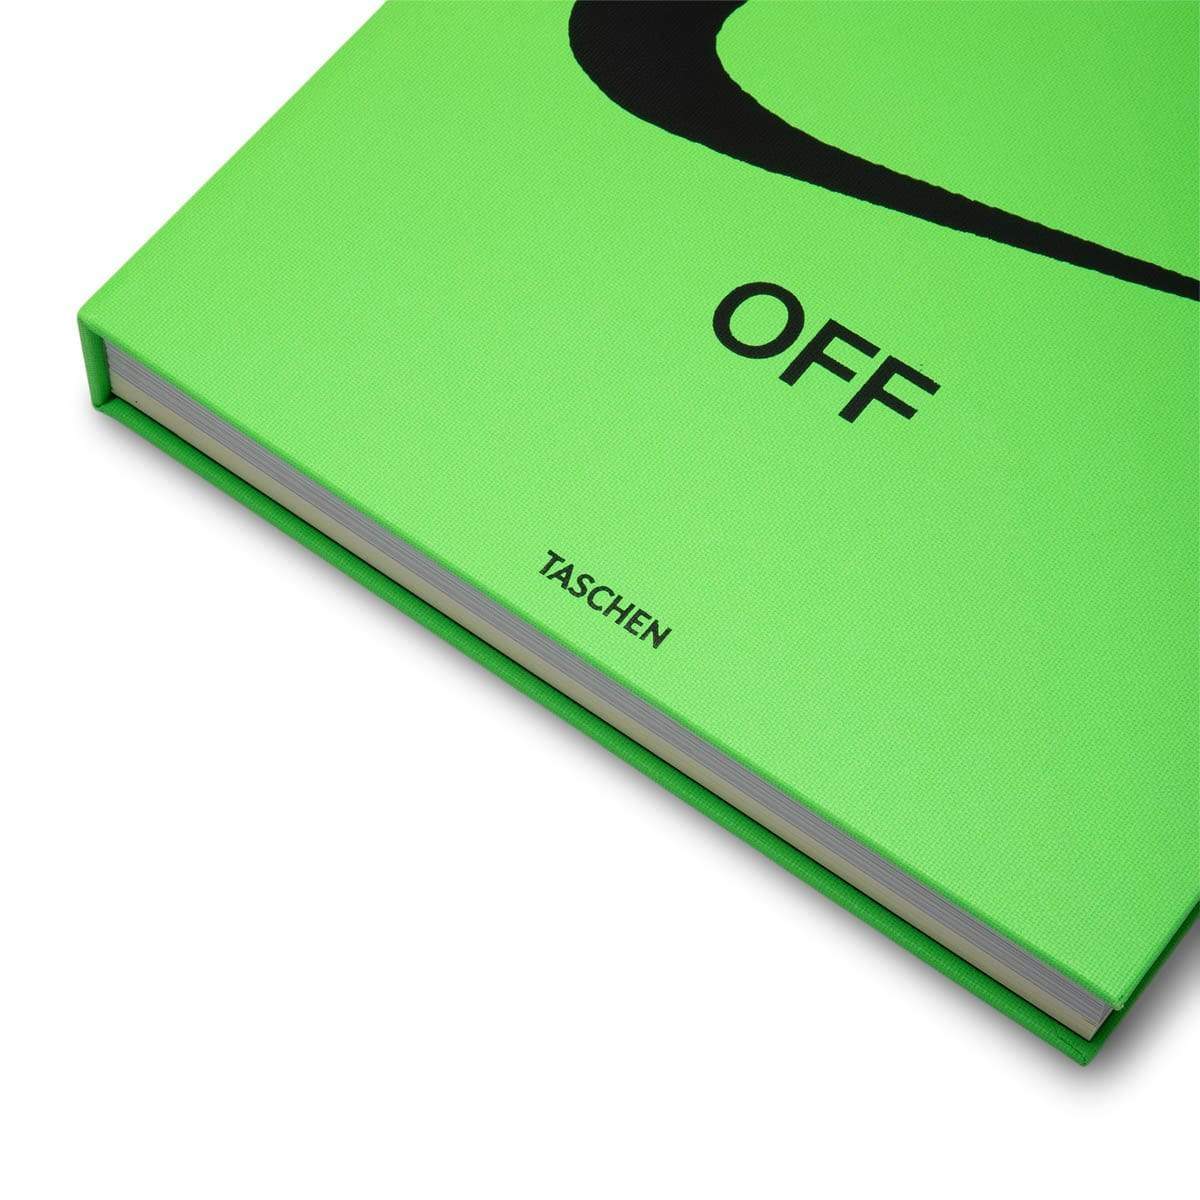 Virgil Abloh x Nike ICONS "The Ten" Something's Off Book